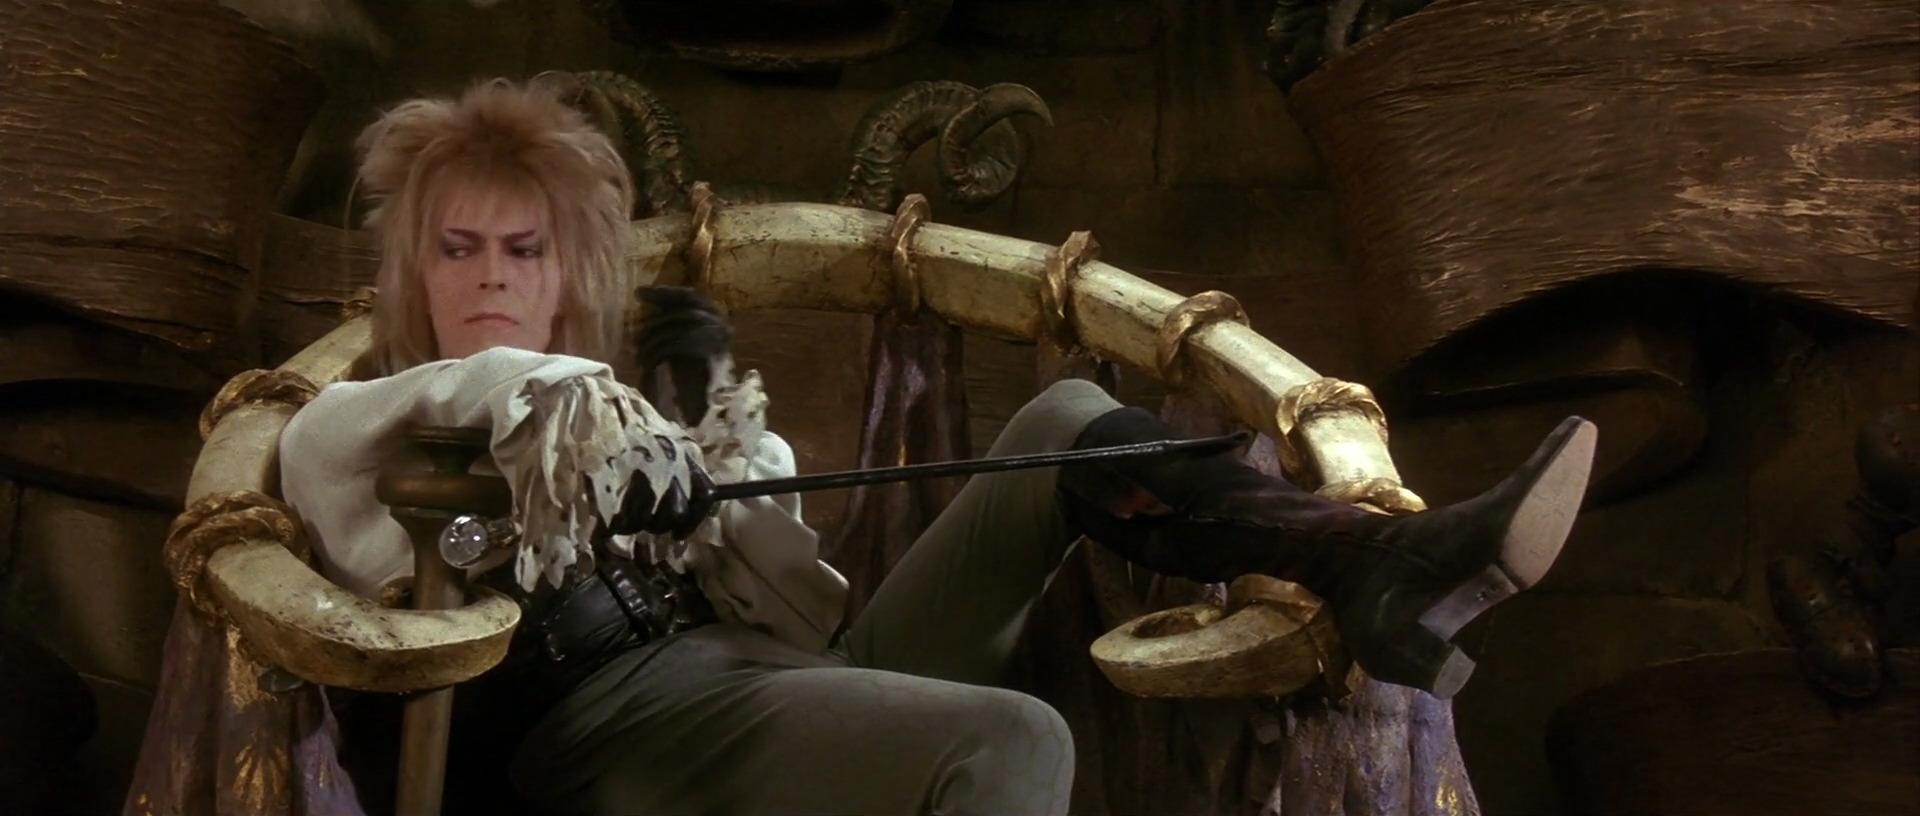 Do you think Jennifer Connelly ever has nightmares about Labyrinth? - Blog  - The Film Experience